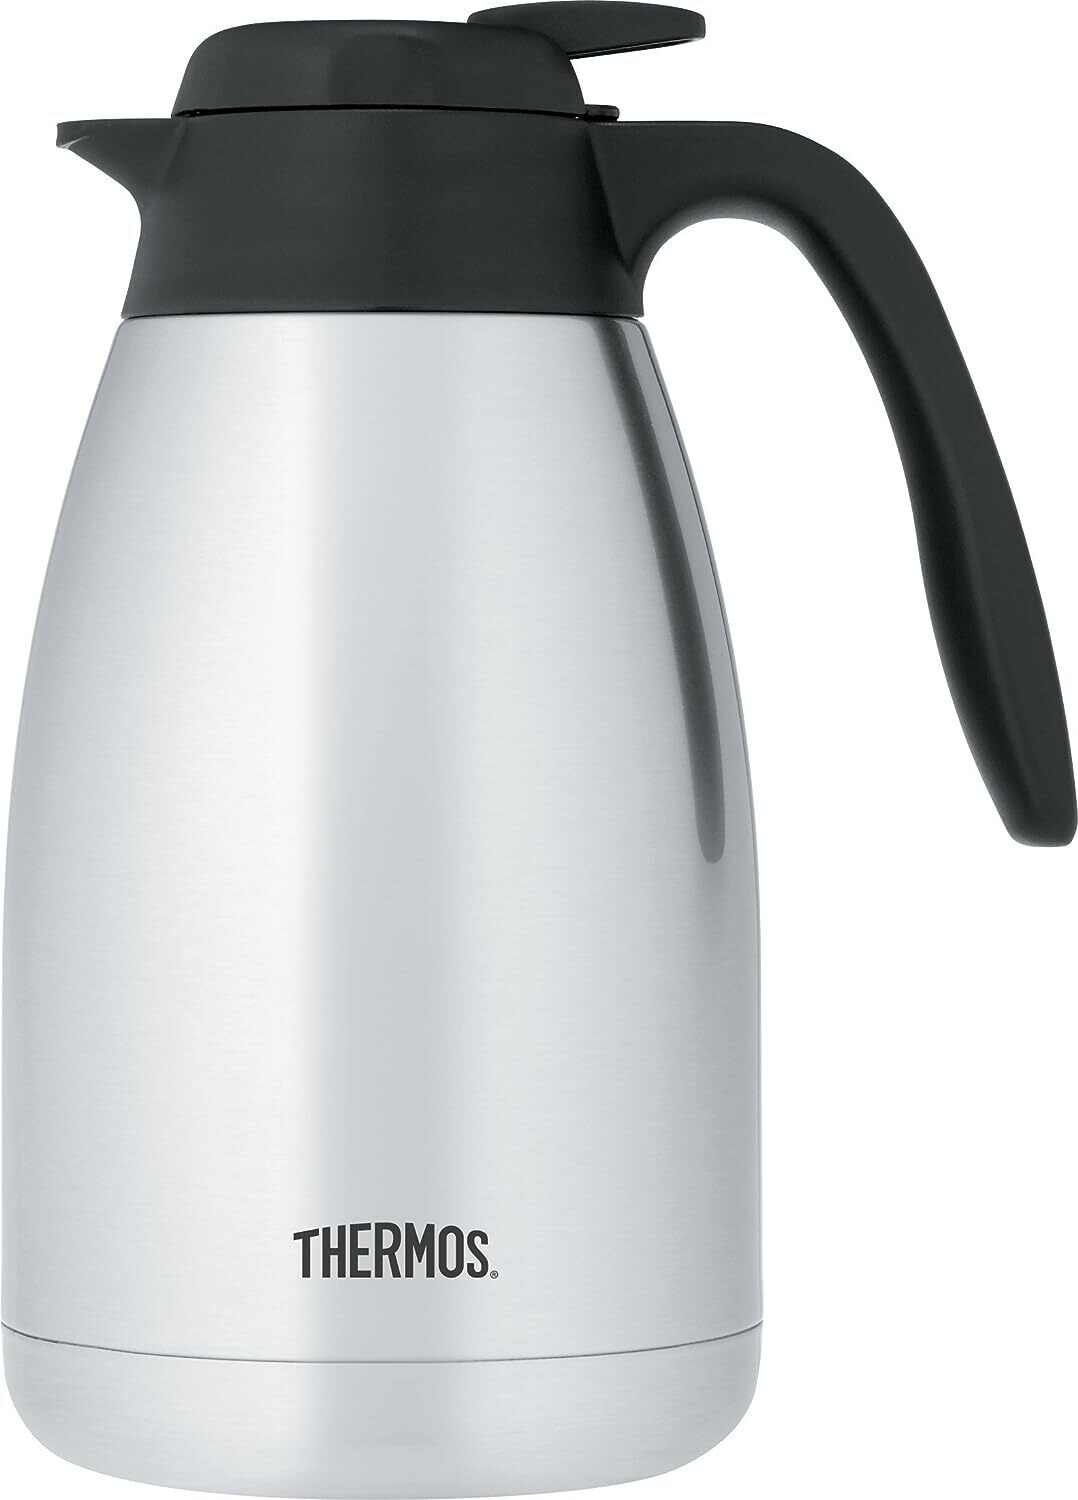 Thermos Vacuum Insulated Stainless Steel Carafe Unbreakable flask 2.0L #SBK